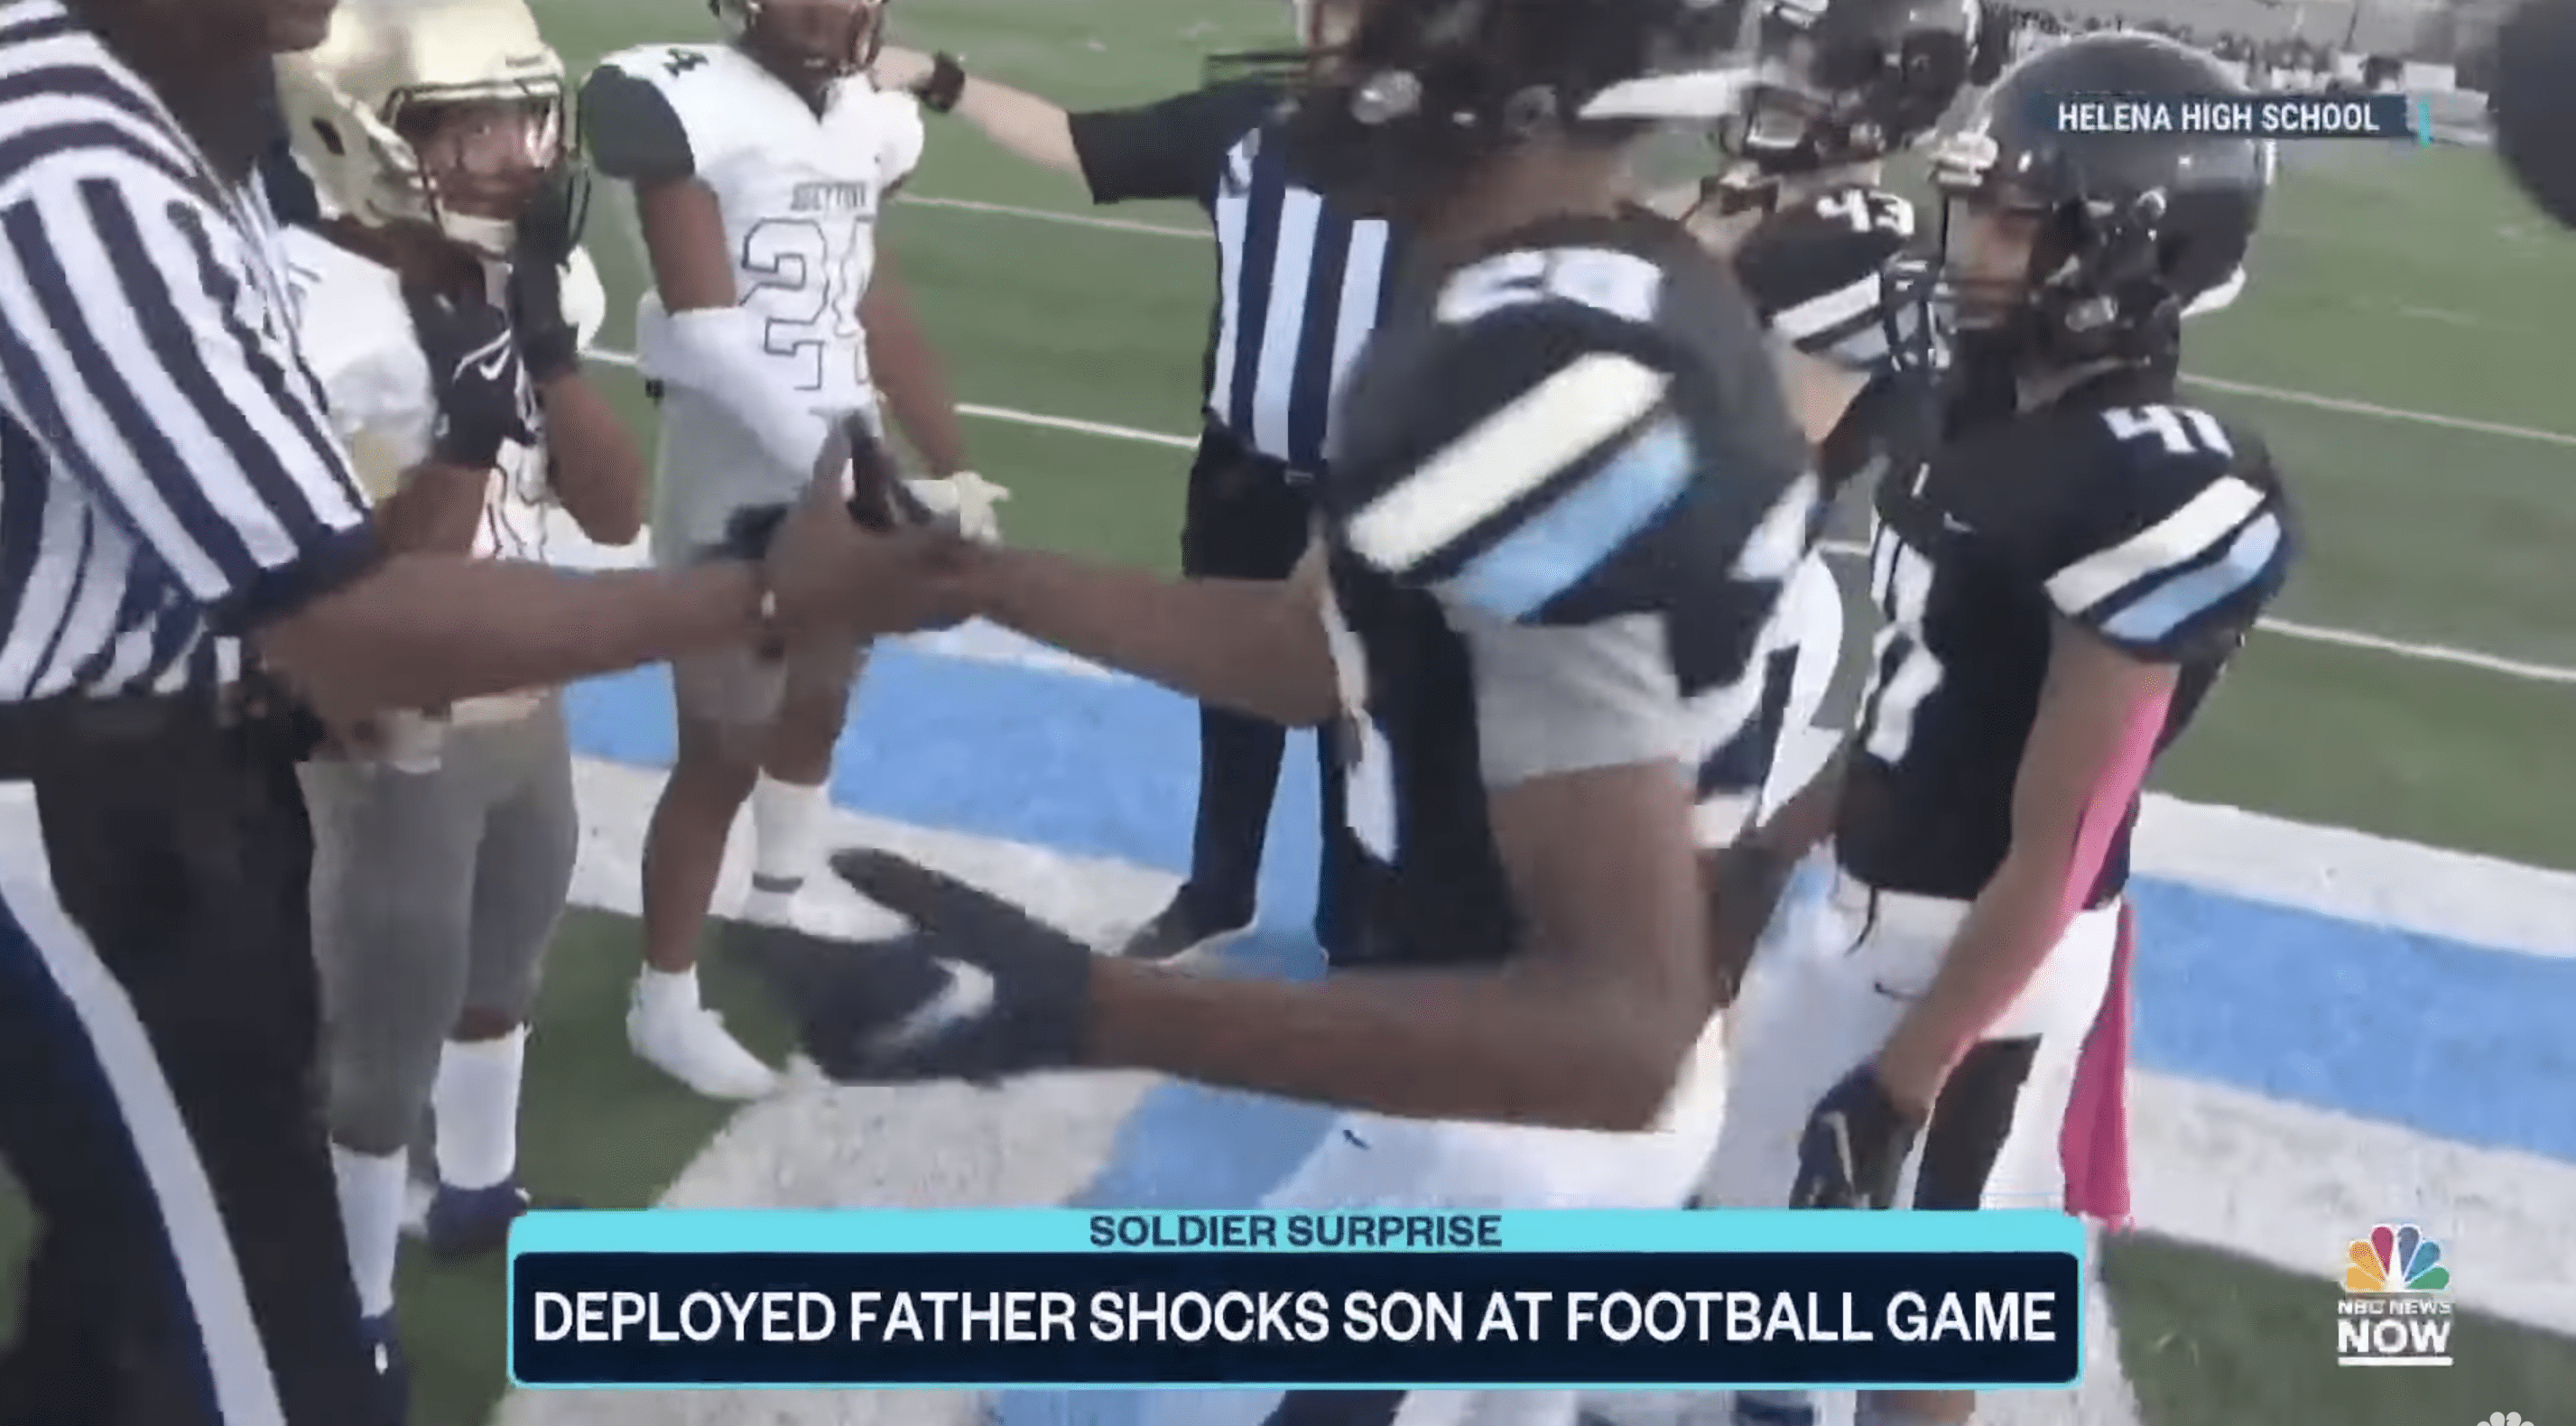 Grooms III shaking hands with his father who was disguises as a referee. | Photo: YouTube.com/NBC News